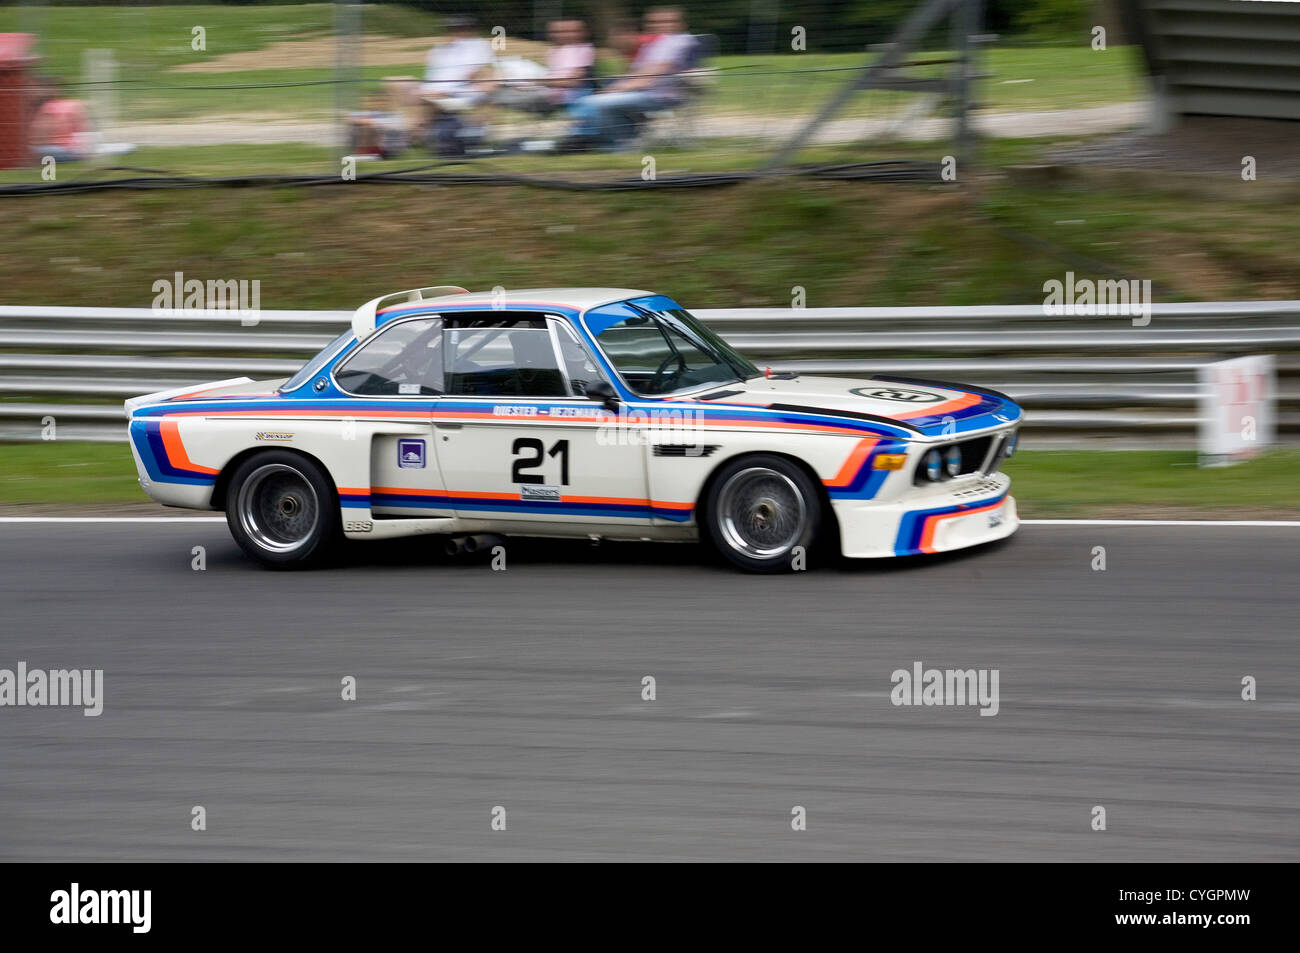 A historic BMW CSL touring car racing at Brands Hatch. Stock Photo